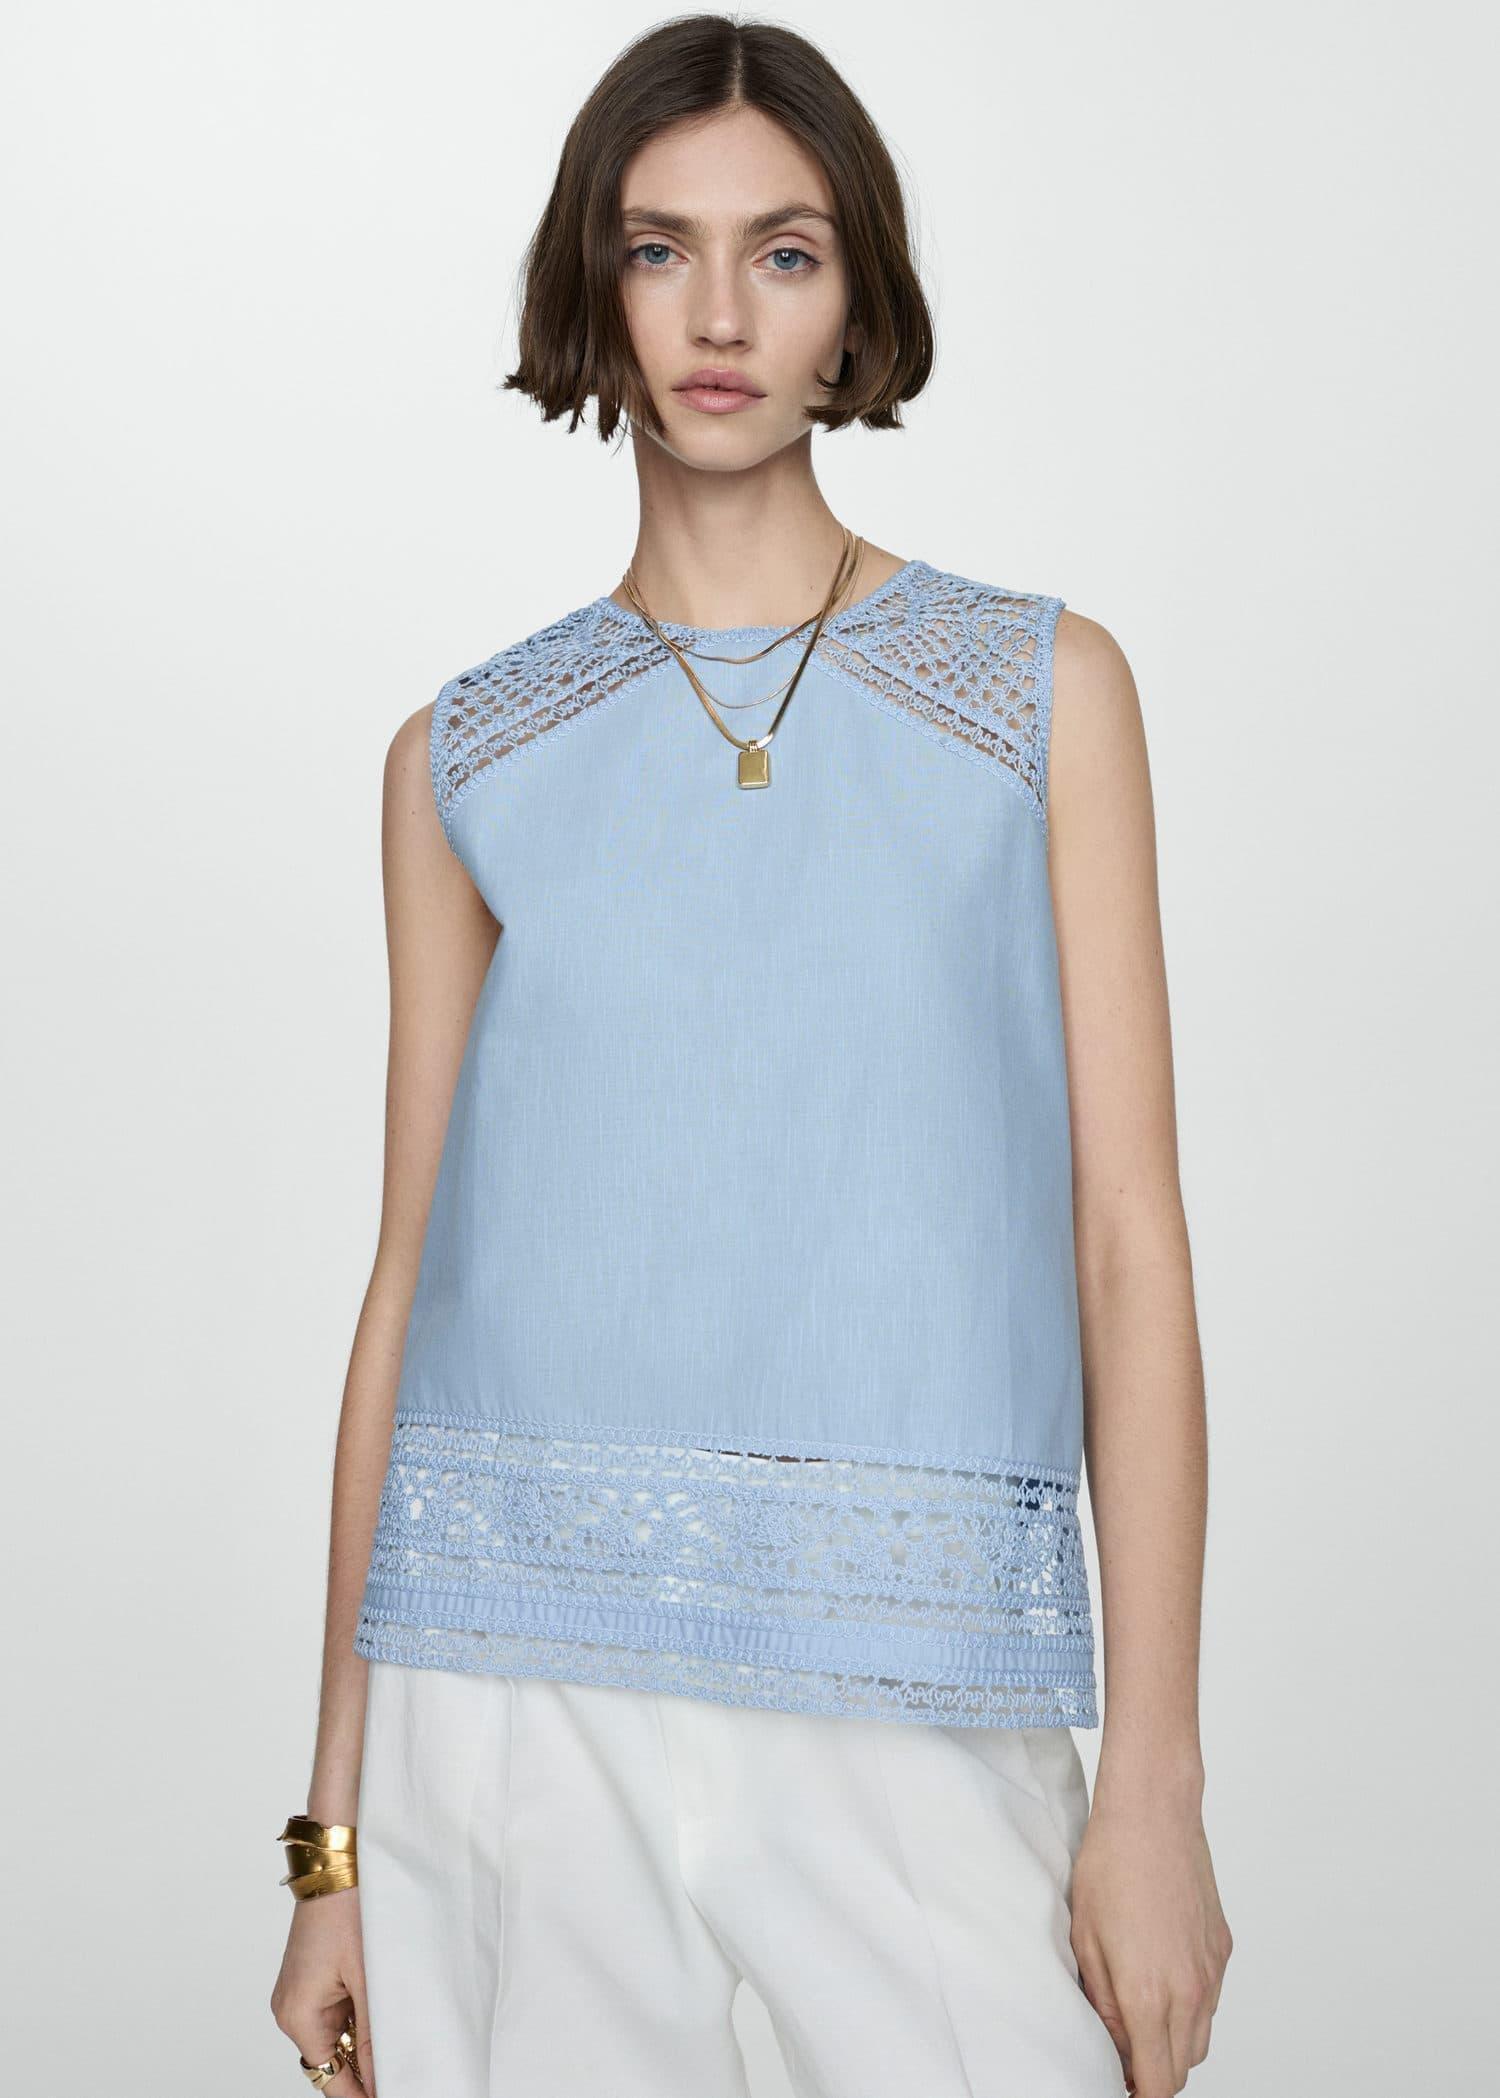 Mango - Blue Embroidered Cotton Top